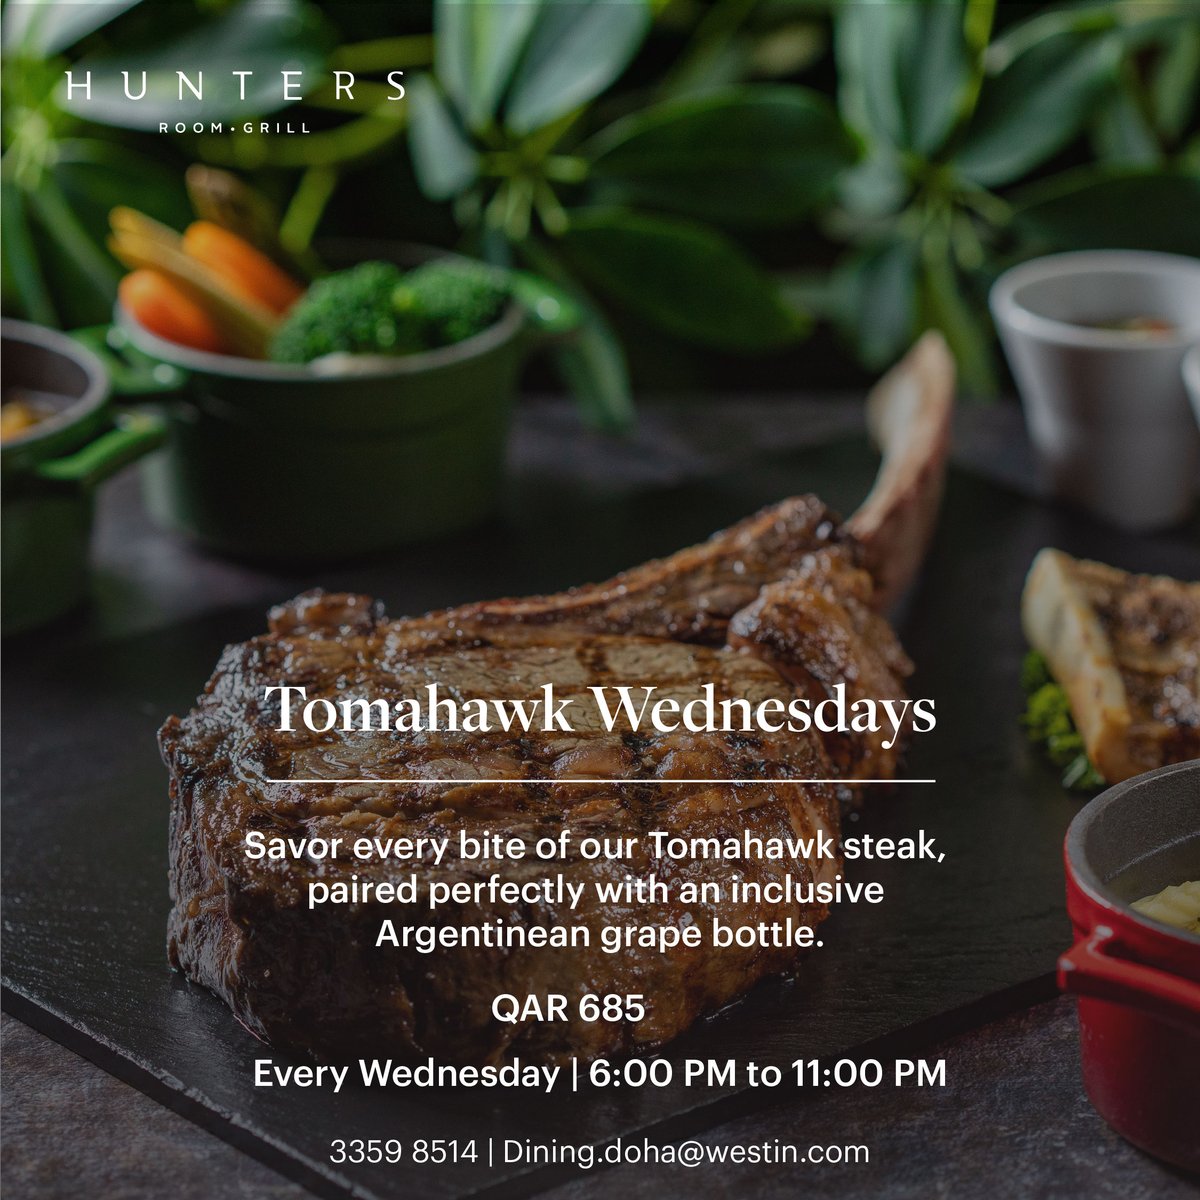 Tomahawk Wednesdays: Dive into the rich flavours of the Tomahawk steak, perfectly paired with a bottle of Argentinian wine for QR685. Join every Wednesday from 6 pm to 11 pm. Book now at +974 3359 8514! #SteakNight #TomahawkWednesday #DineInDoha #GourmetExperience @WestinDoha